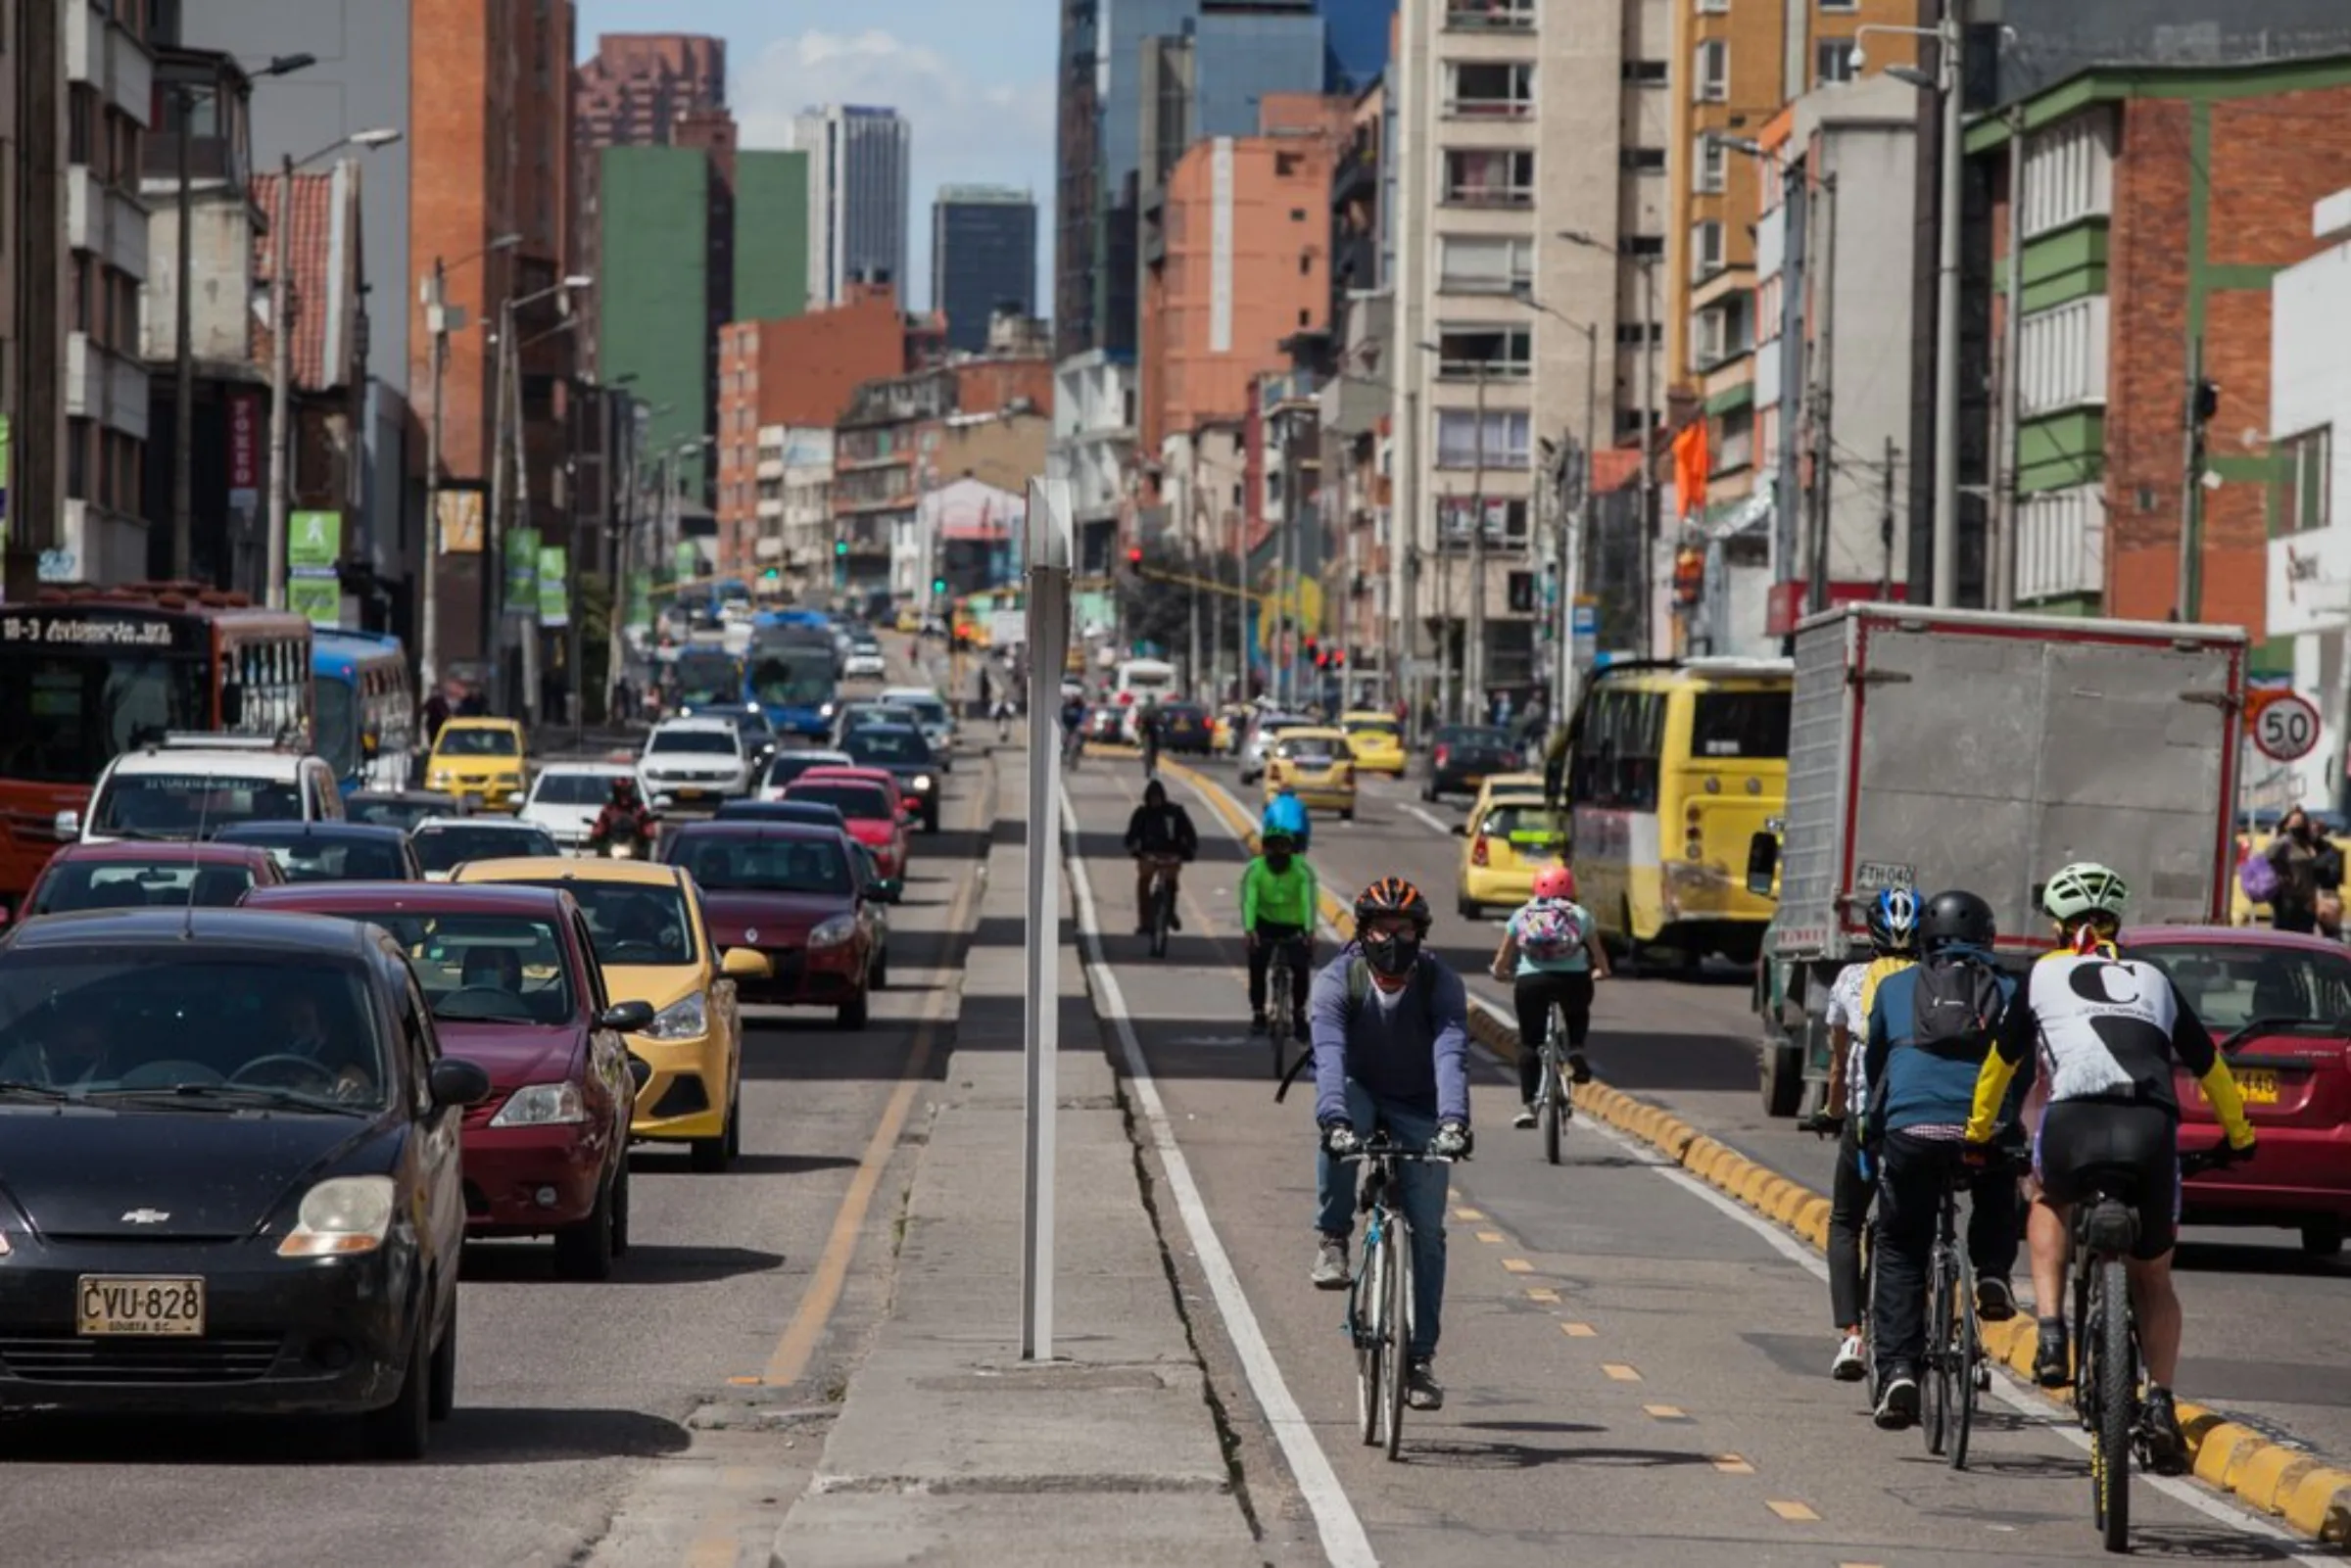 Cyclists ride on separated cycle lanes in Bogota, Colombia, April 19, 2021